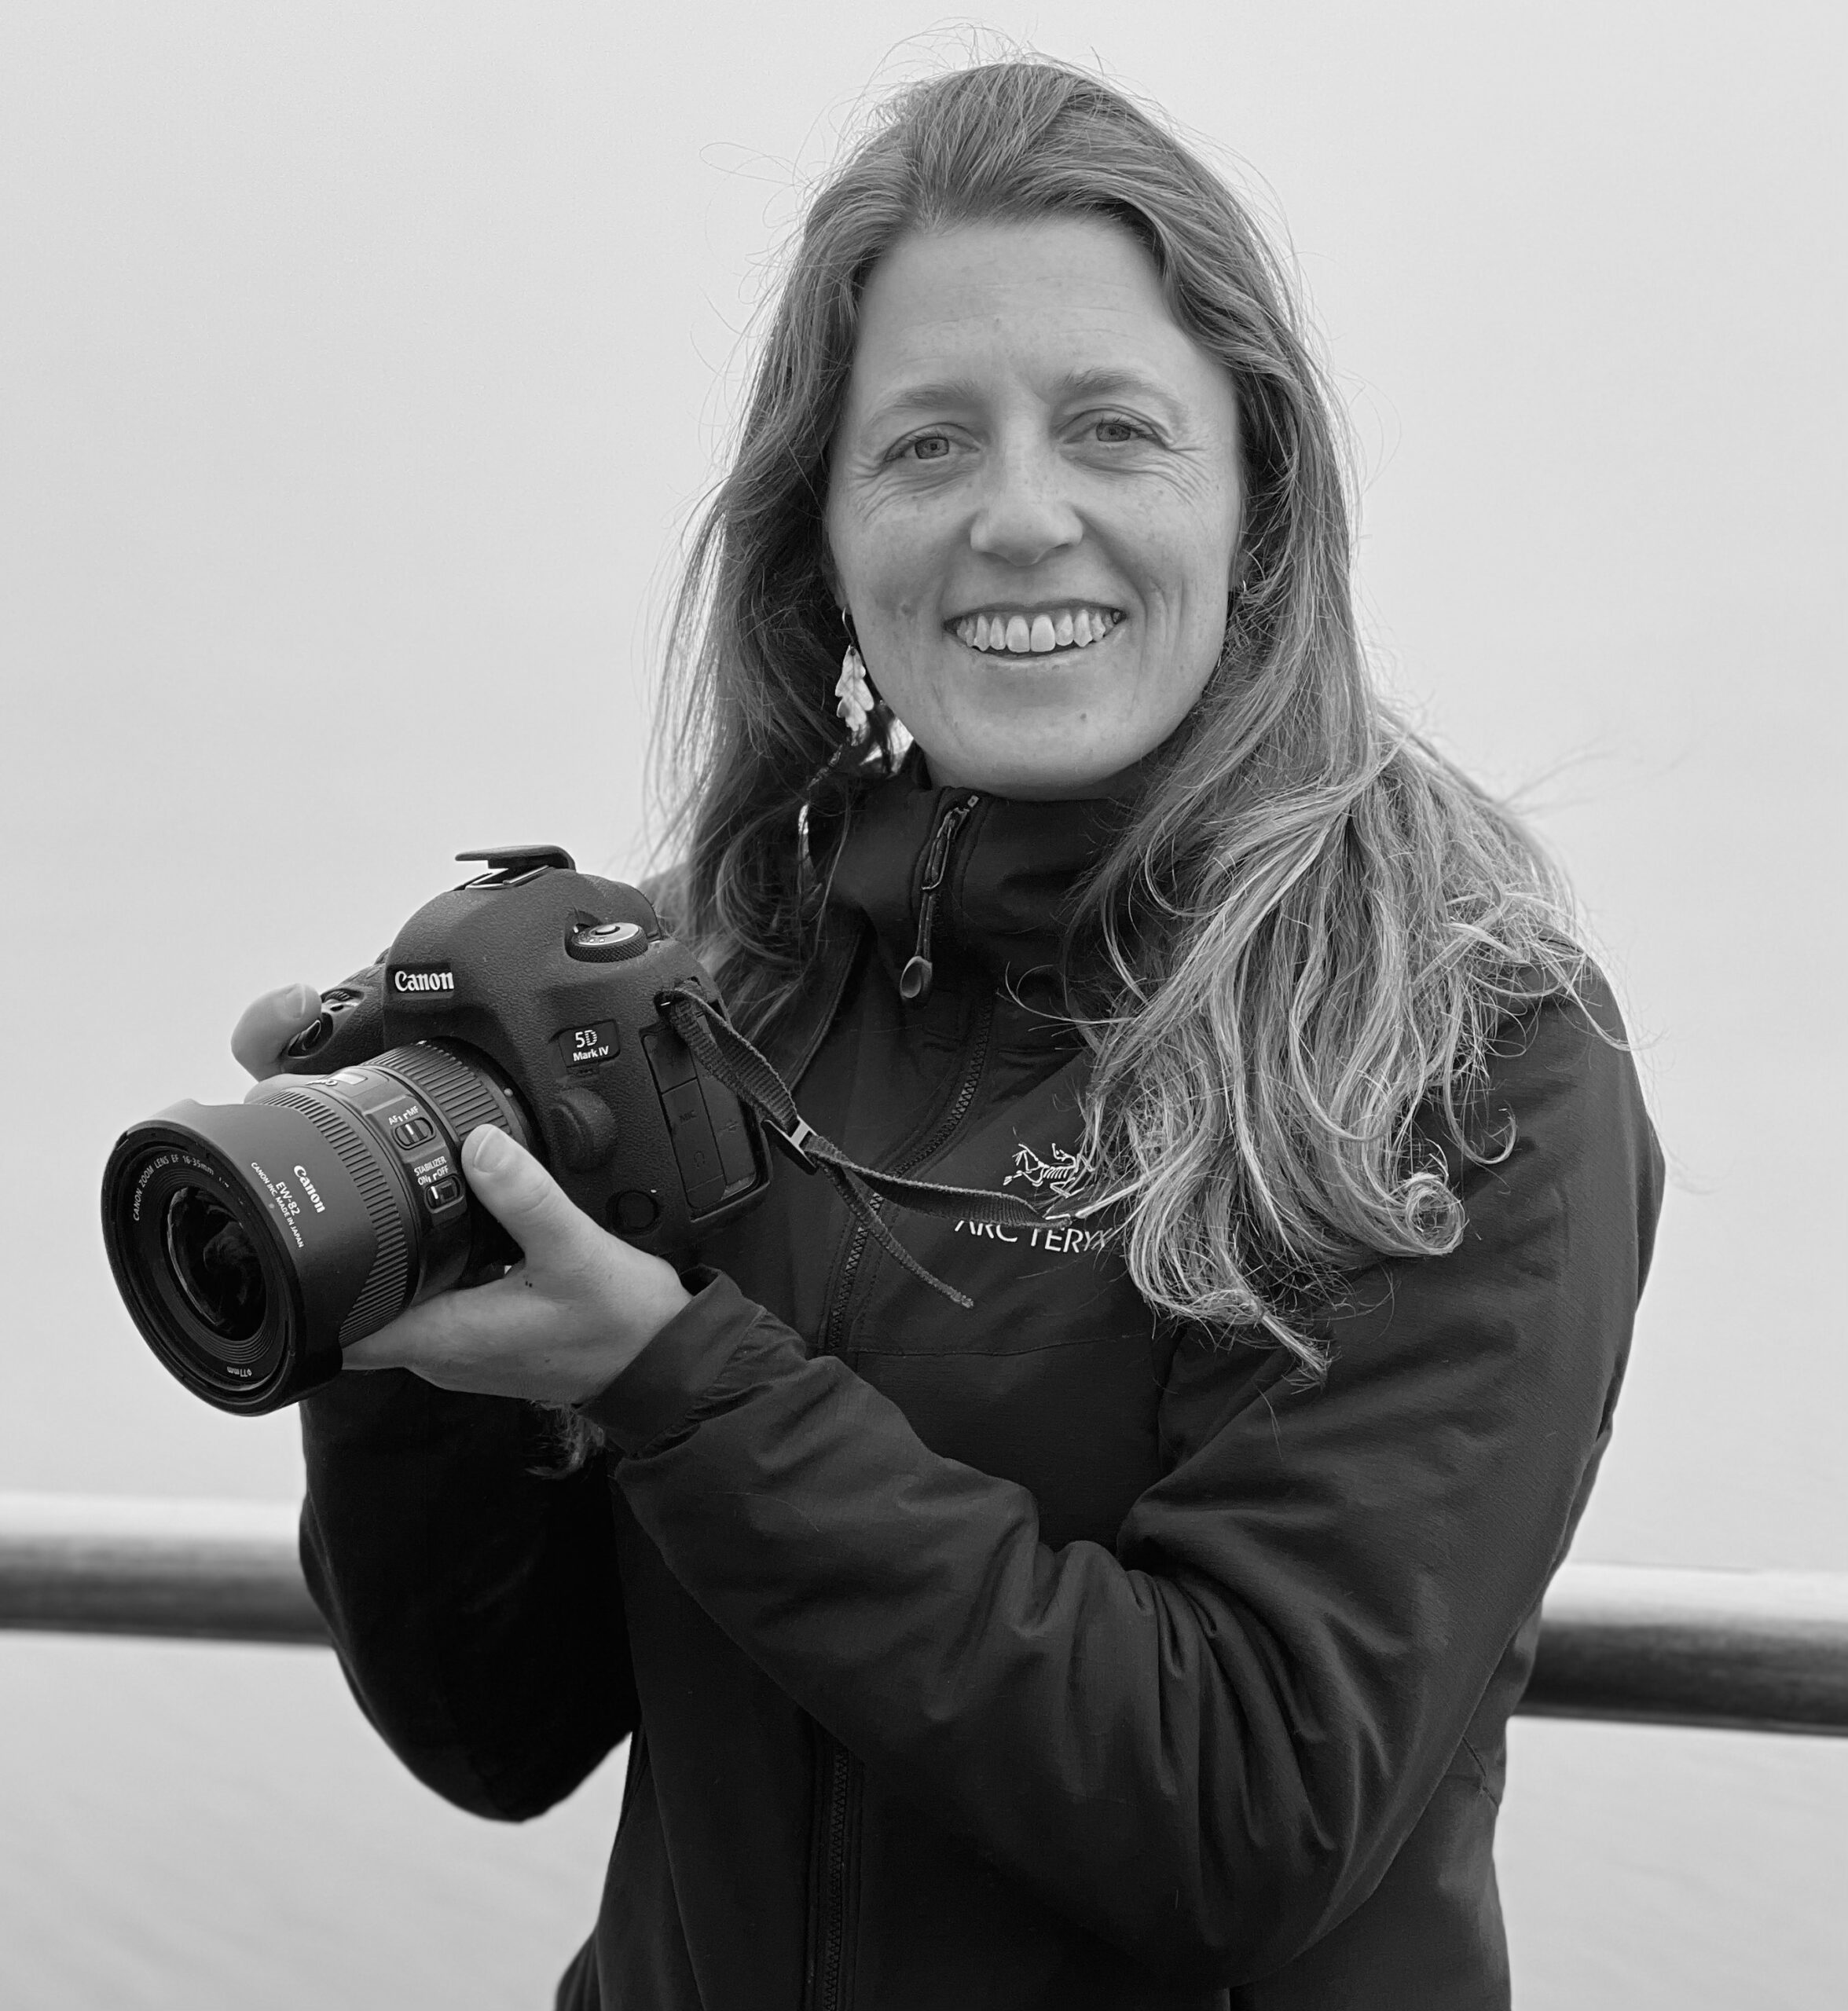 Black and white photograph of Michelle Sole, author of Antarctica: A Bird's-Eye View, holding a Canon camera and facing the camera.